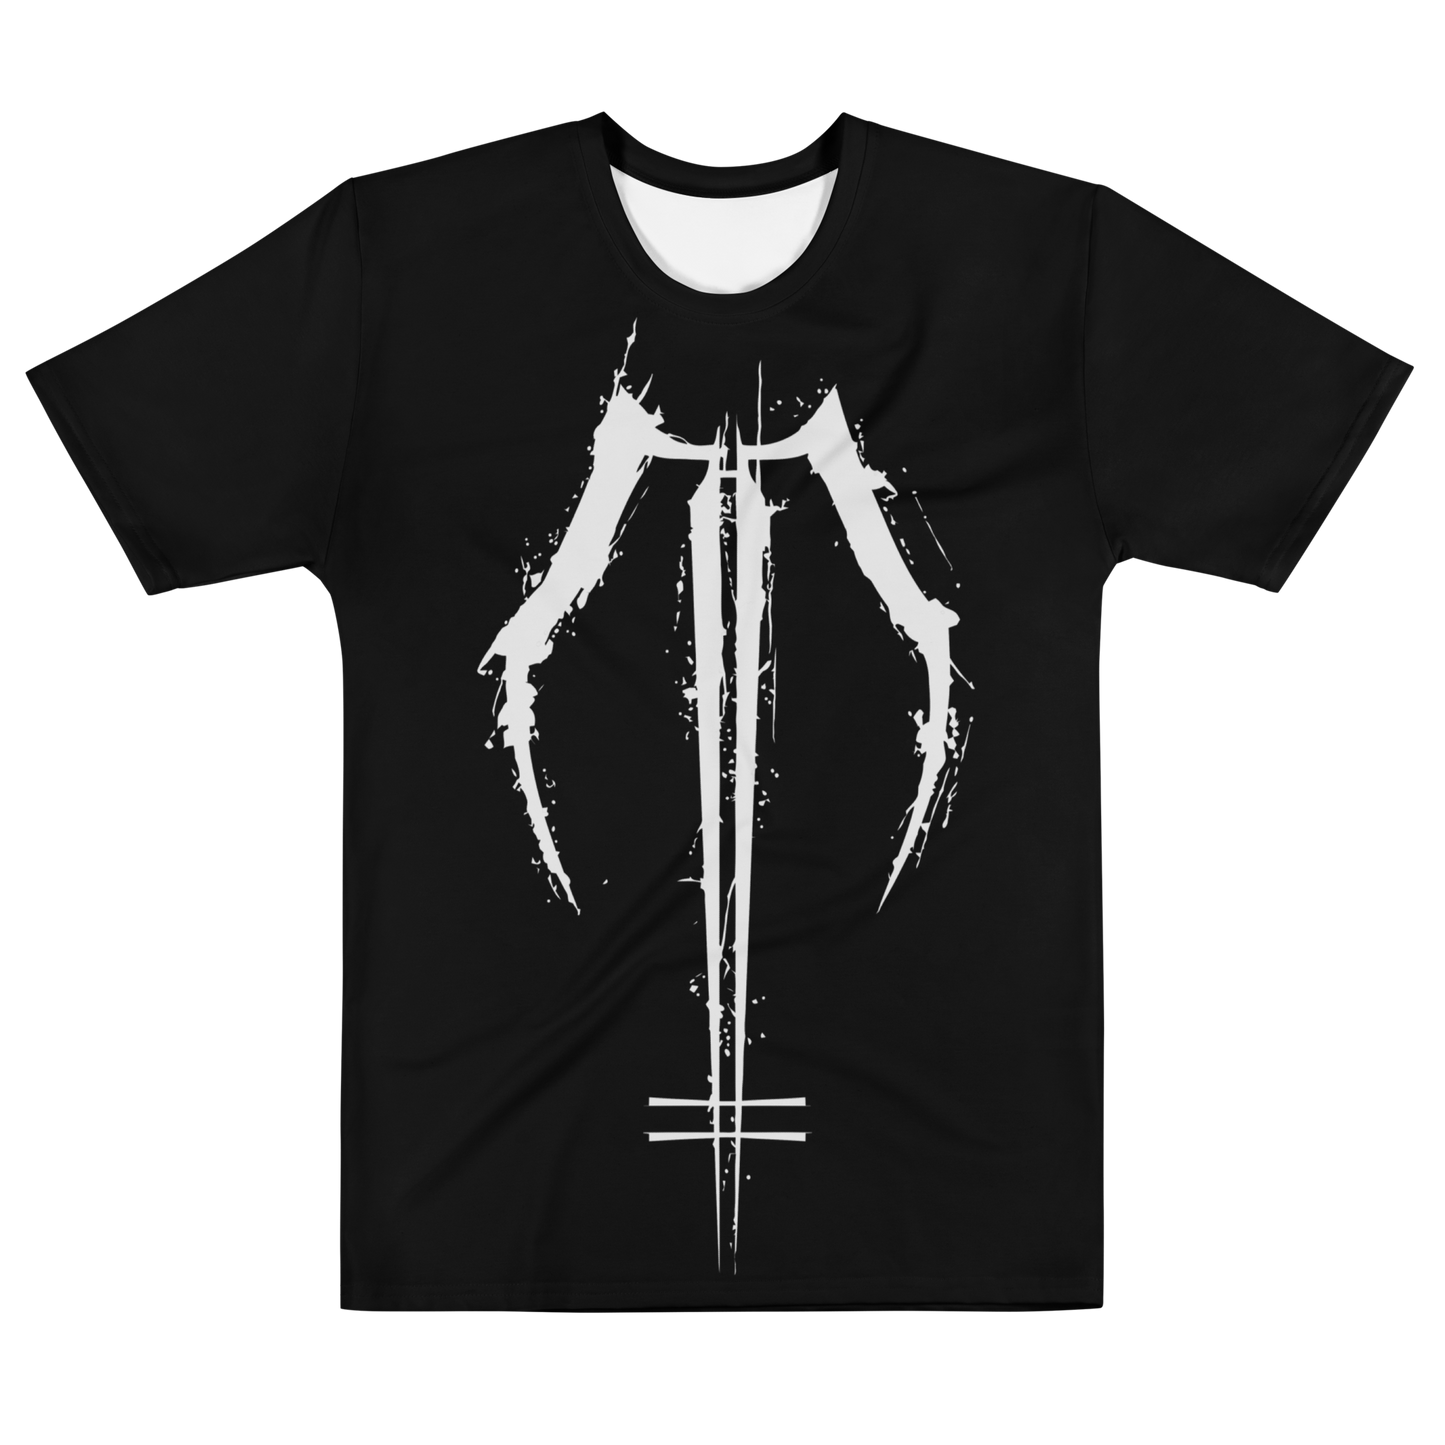 Made in Hell Unisex t-shirt